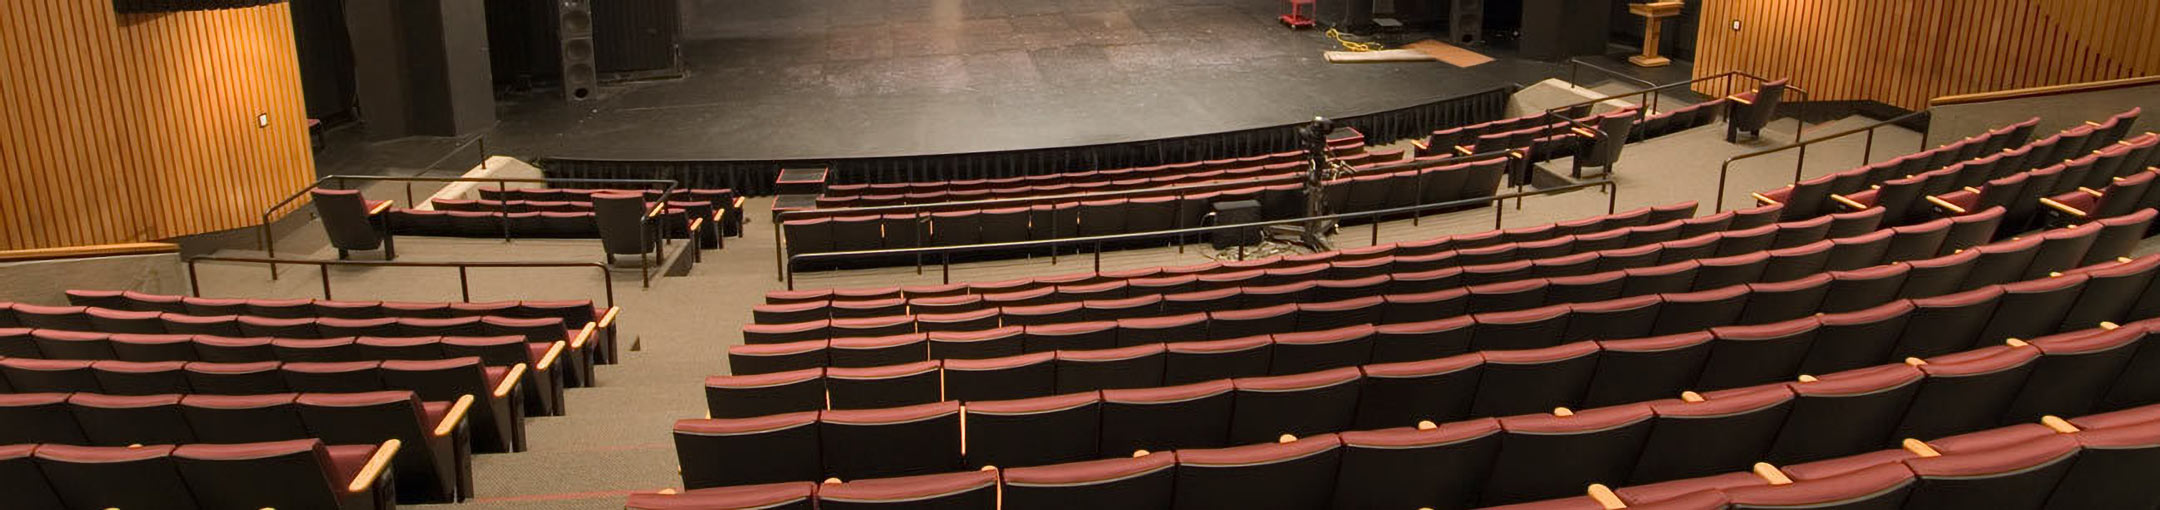 A view of the stage in the Robert F. Panara Theatre from a seat in the audience.